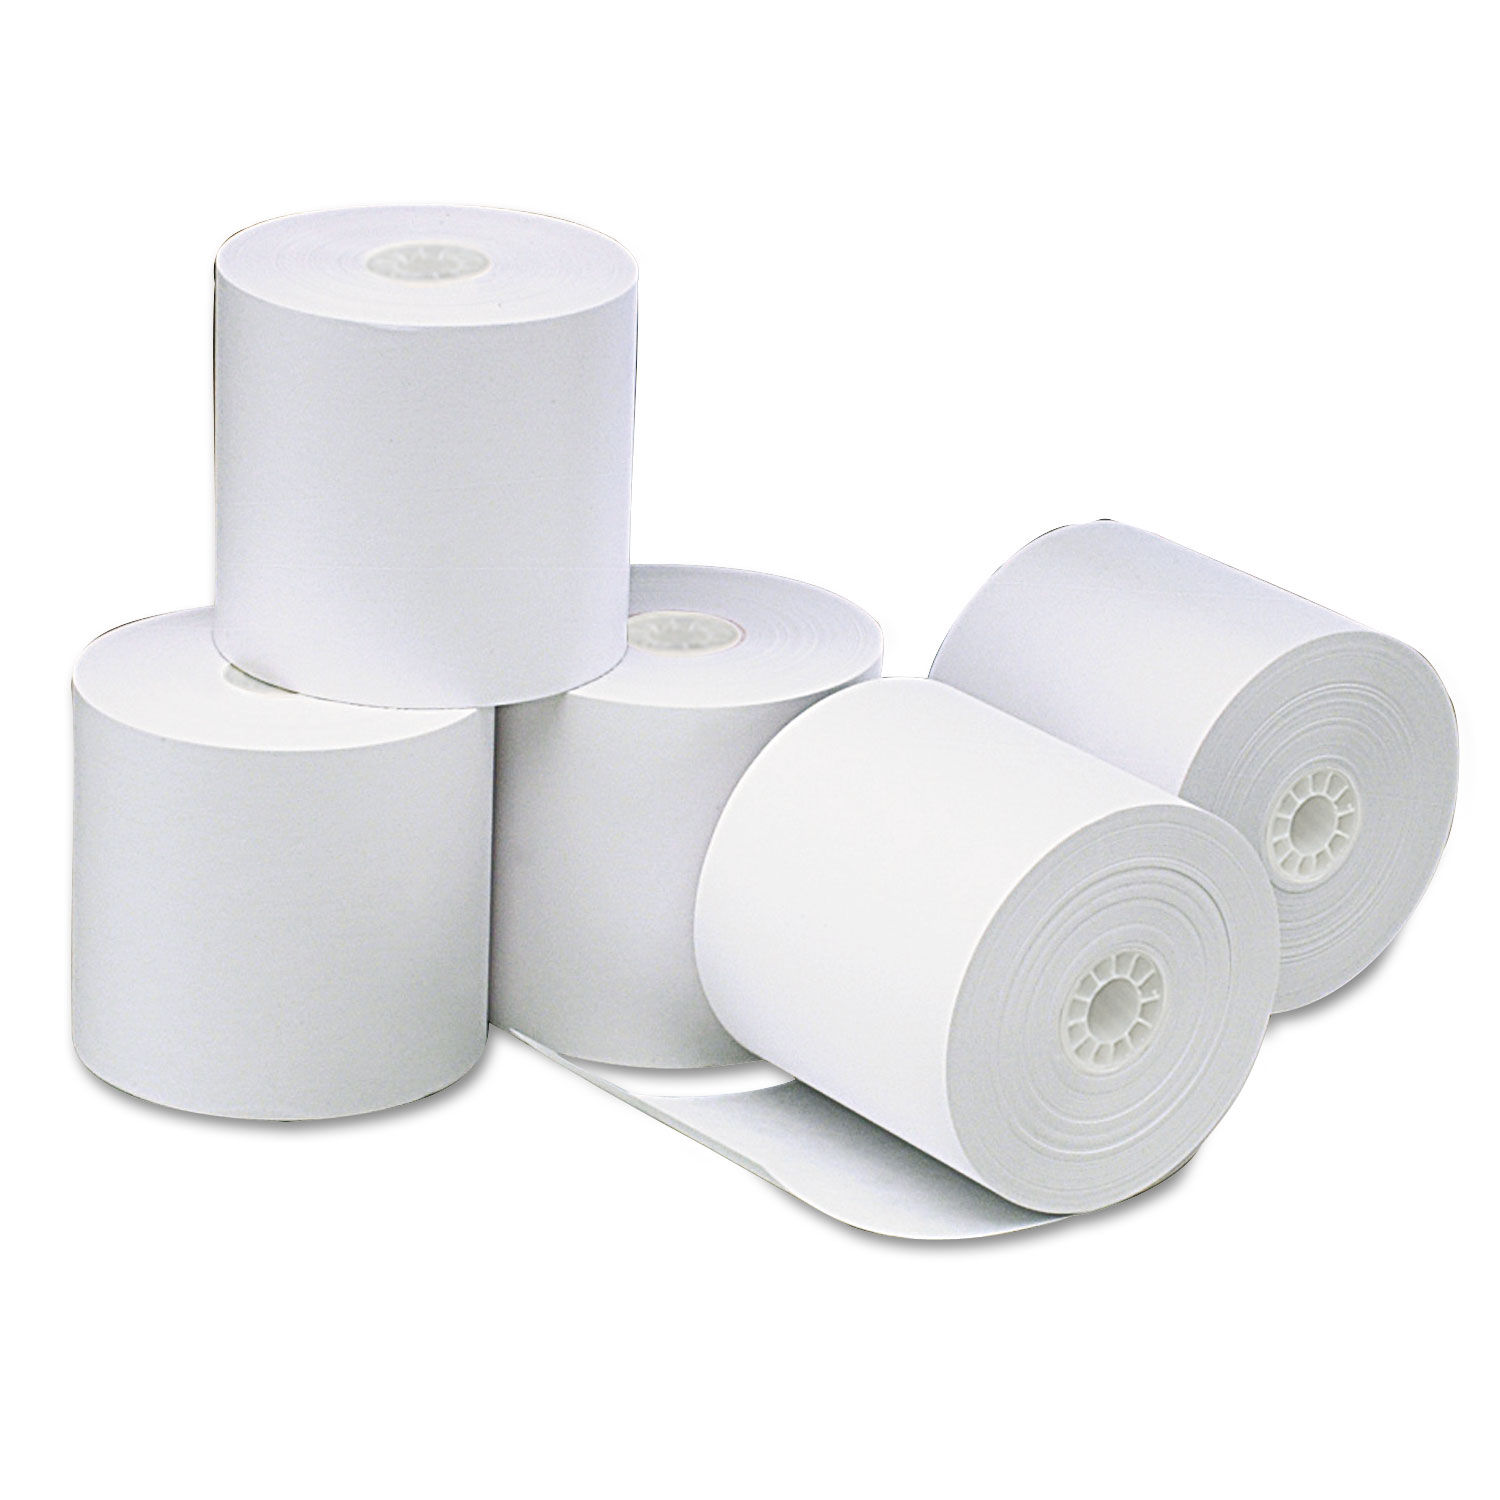 Direct Thermal Printing Paper Rolls 3.13" x 273 ft, White, 50/Carton